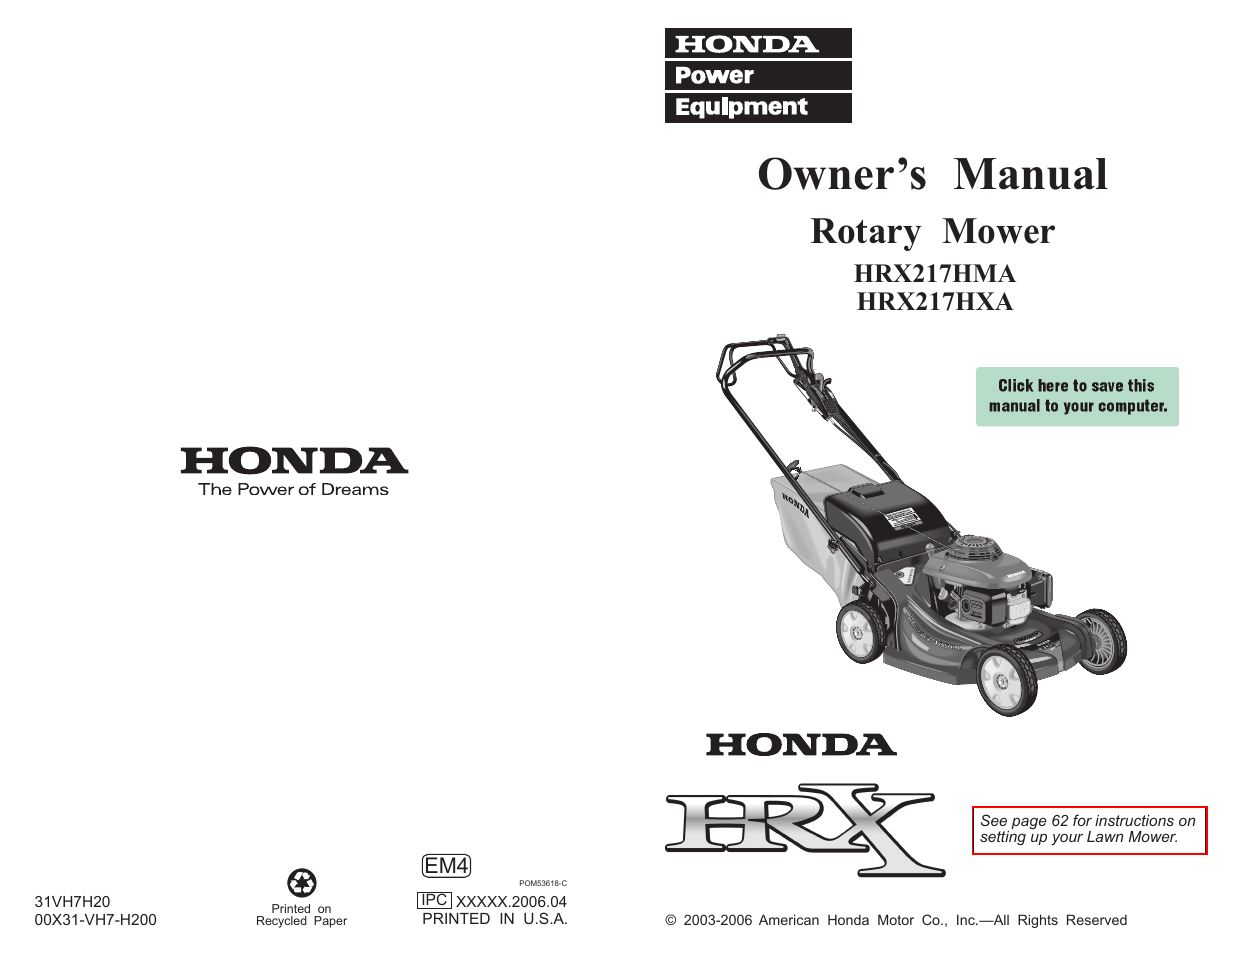 HONDA HRX217HXA User Manual 86 pages Also for HRX217HMA